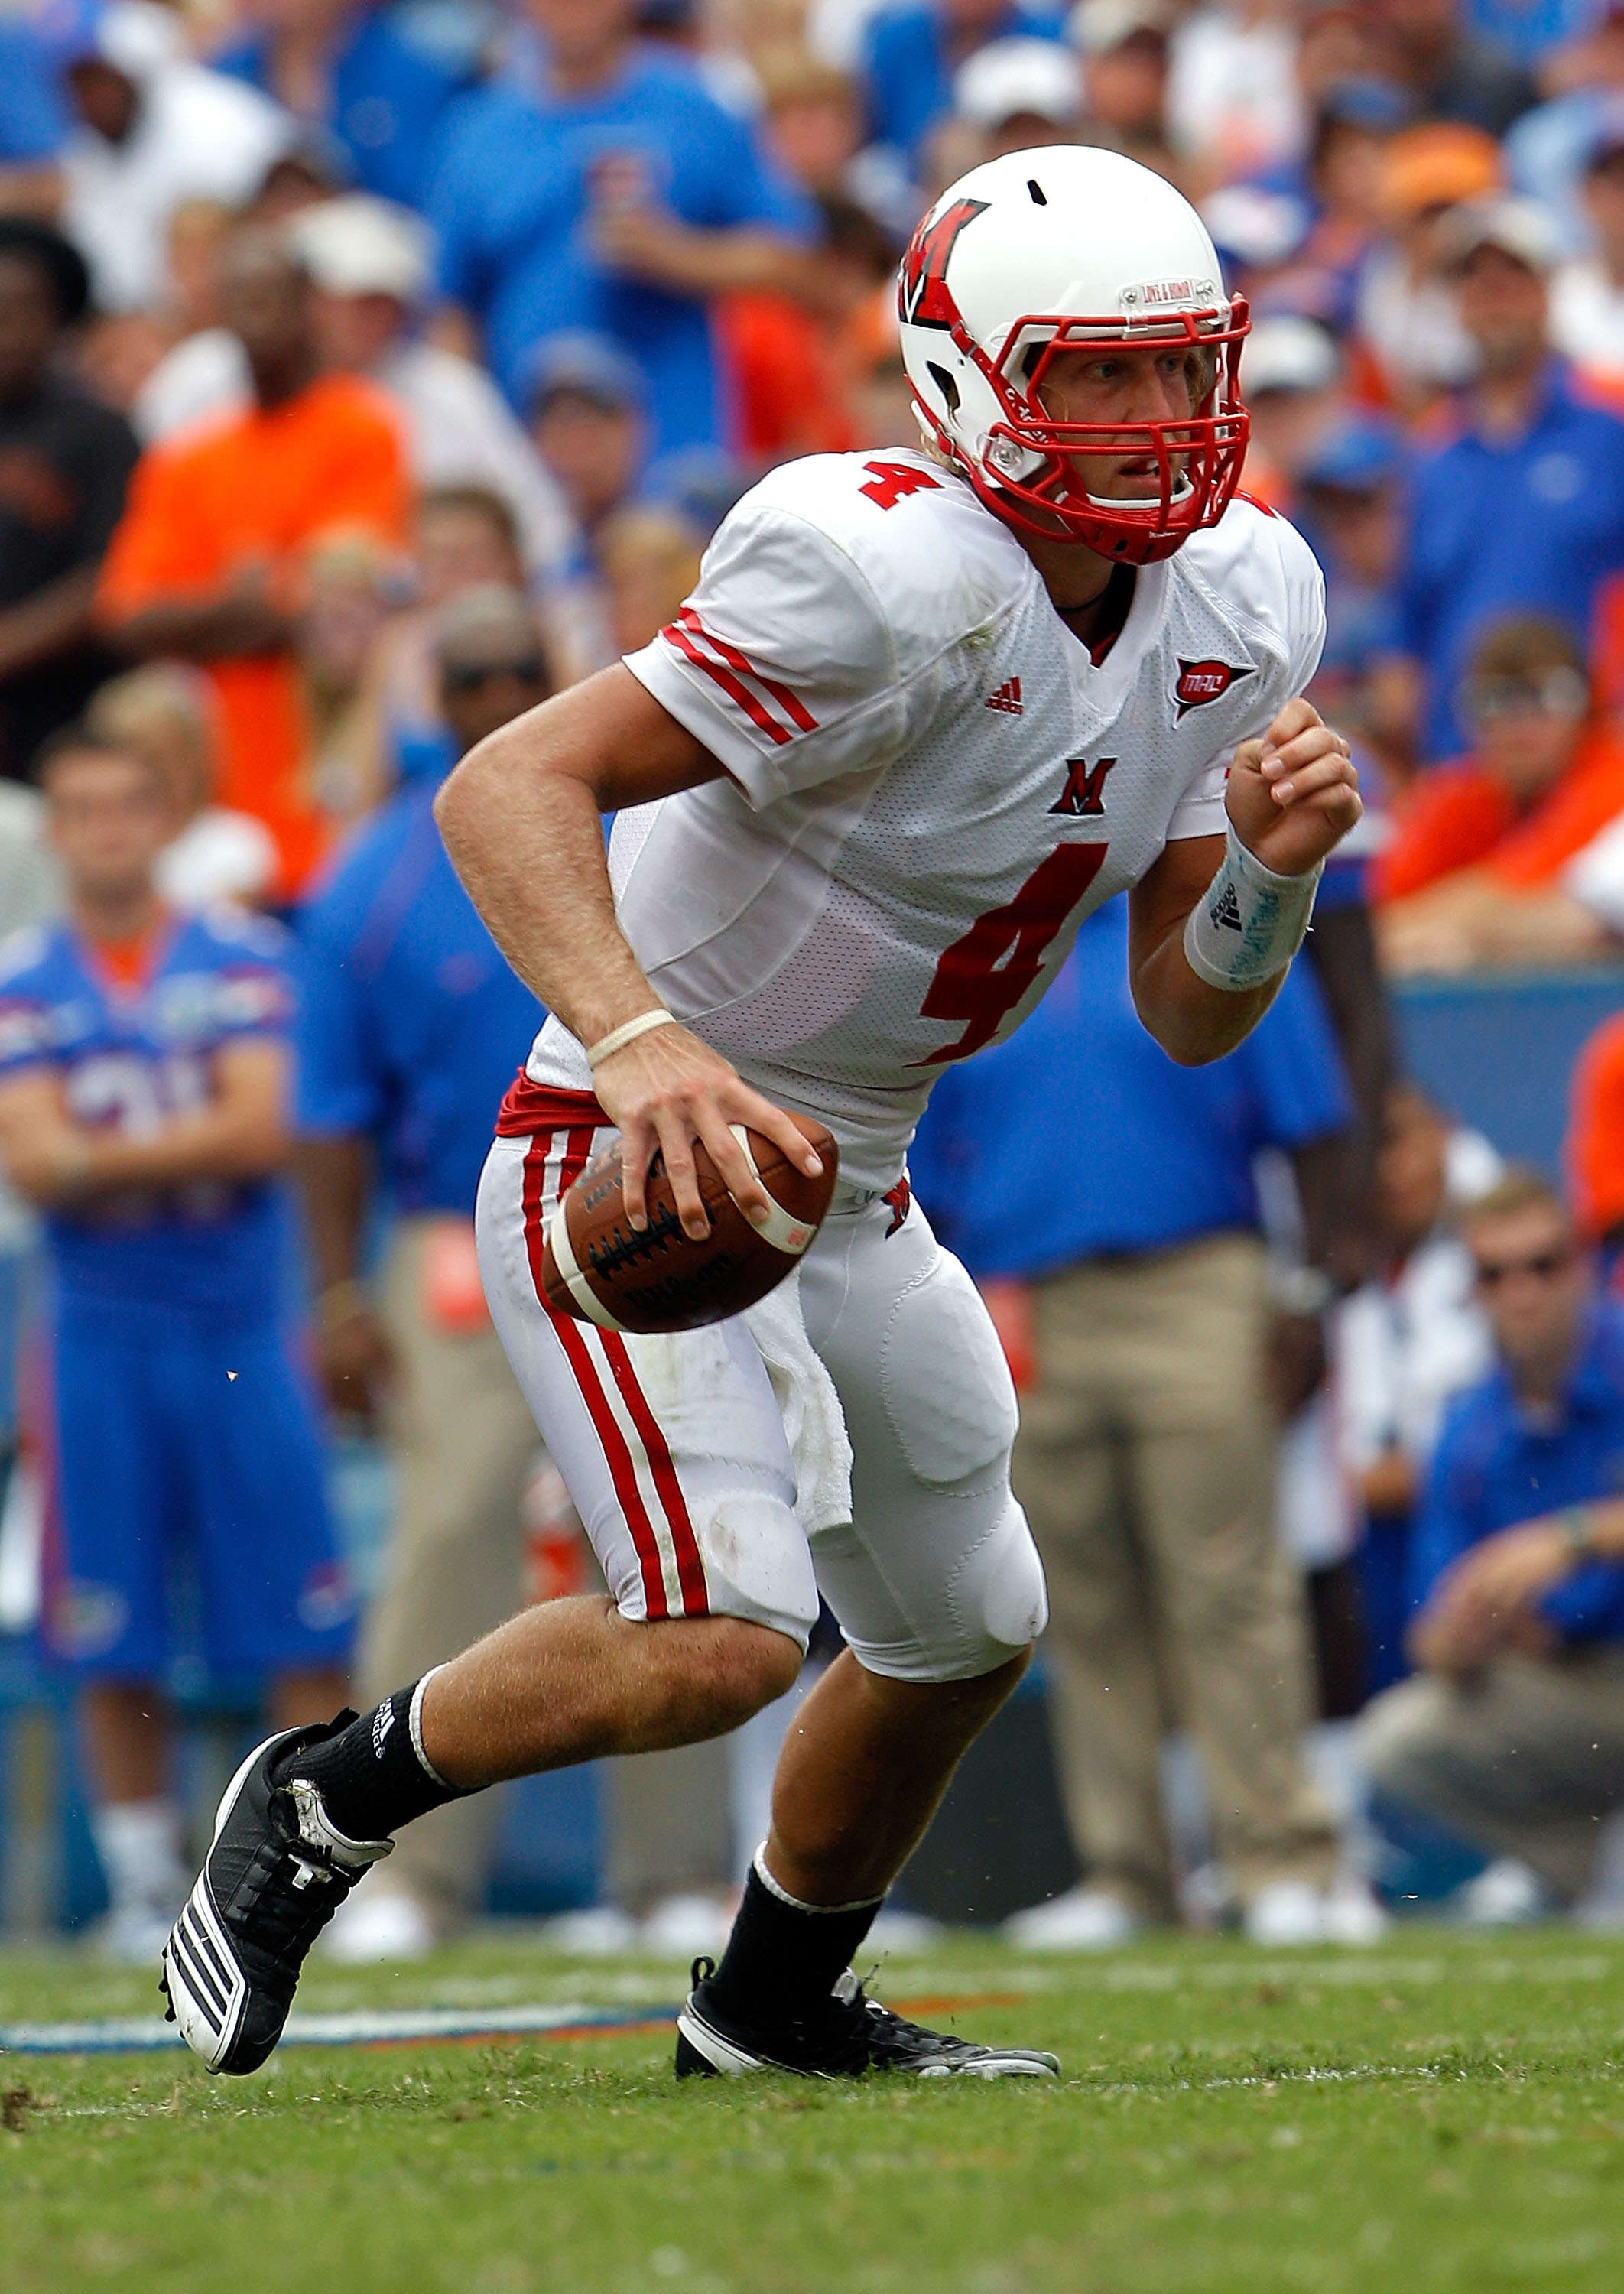 GAINESVILLE, FL - SEPTEMBER 04:  Quarterback Zac Dysert #4 of the Miami University RedHawks runs against the Florida Gators at Ben Hill Griffin Stadium on September 4, 2010 in Gainesville, Florida.  (Photo by Sam Greenwood/Getty Images)